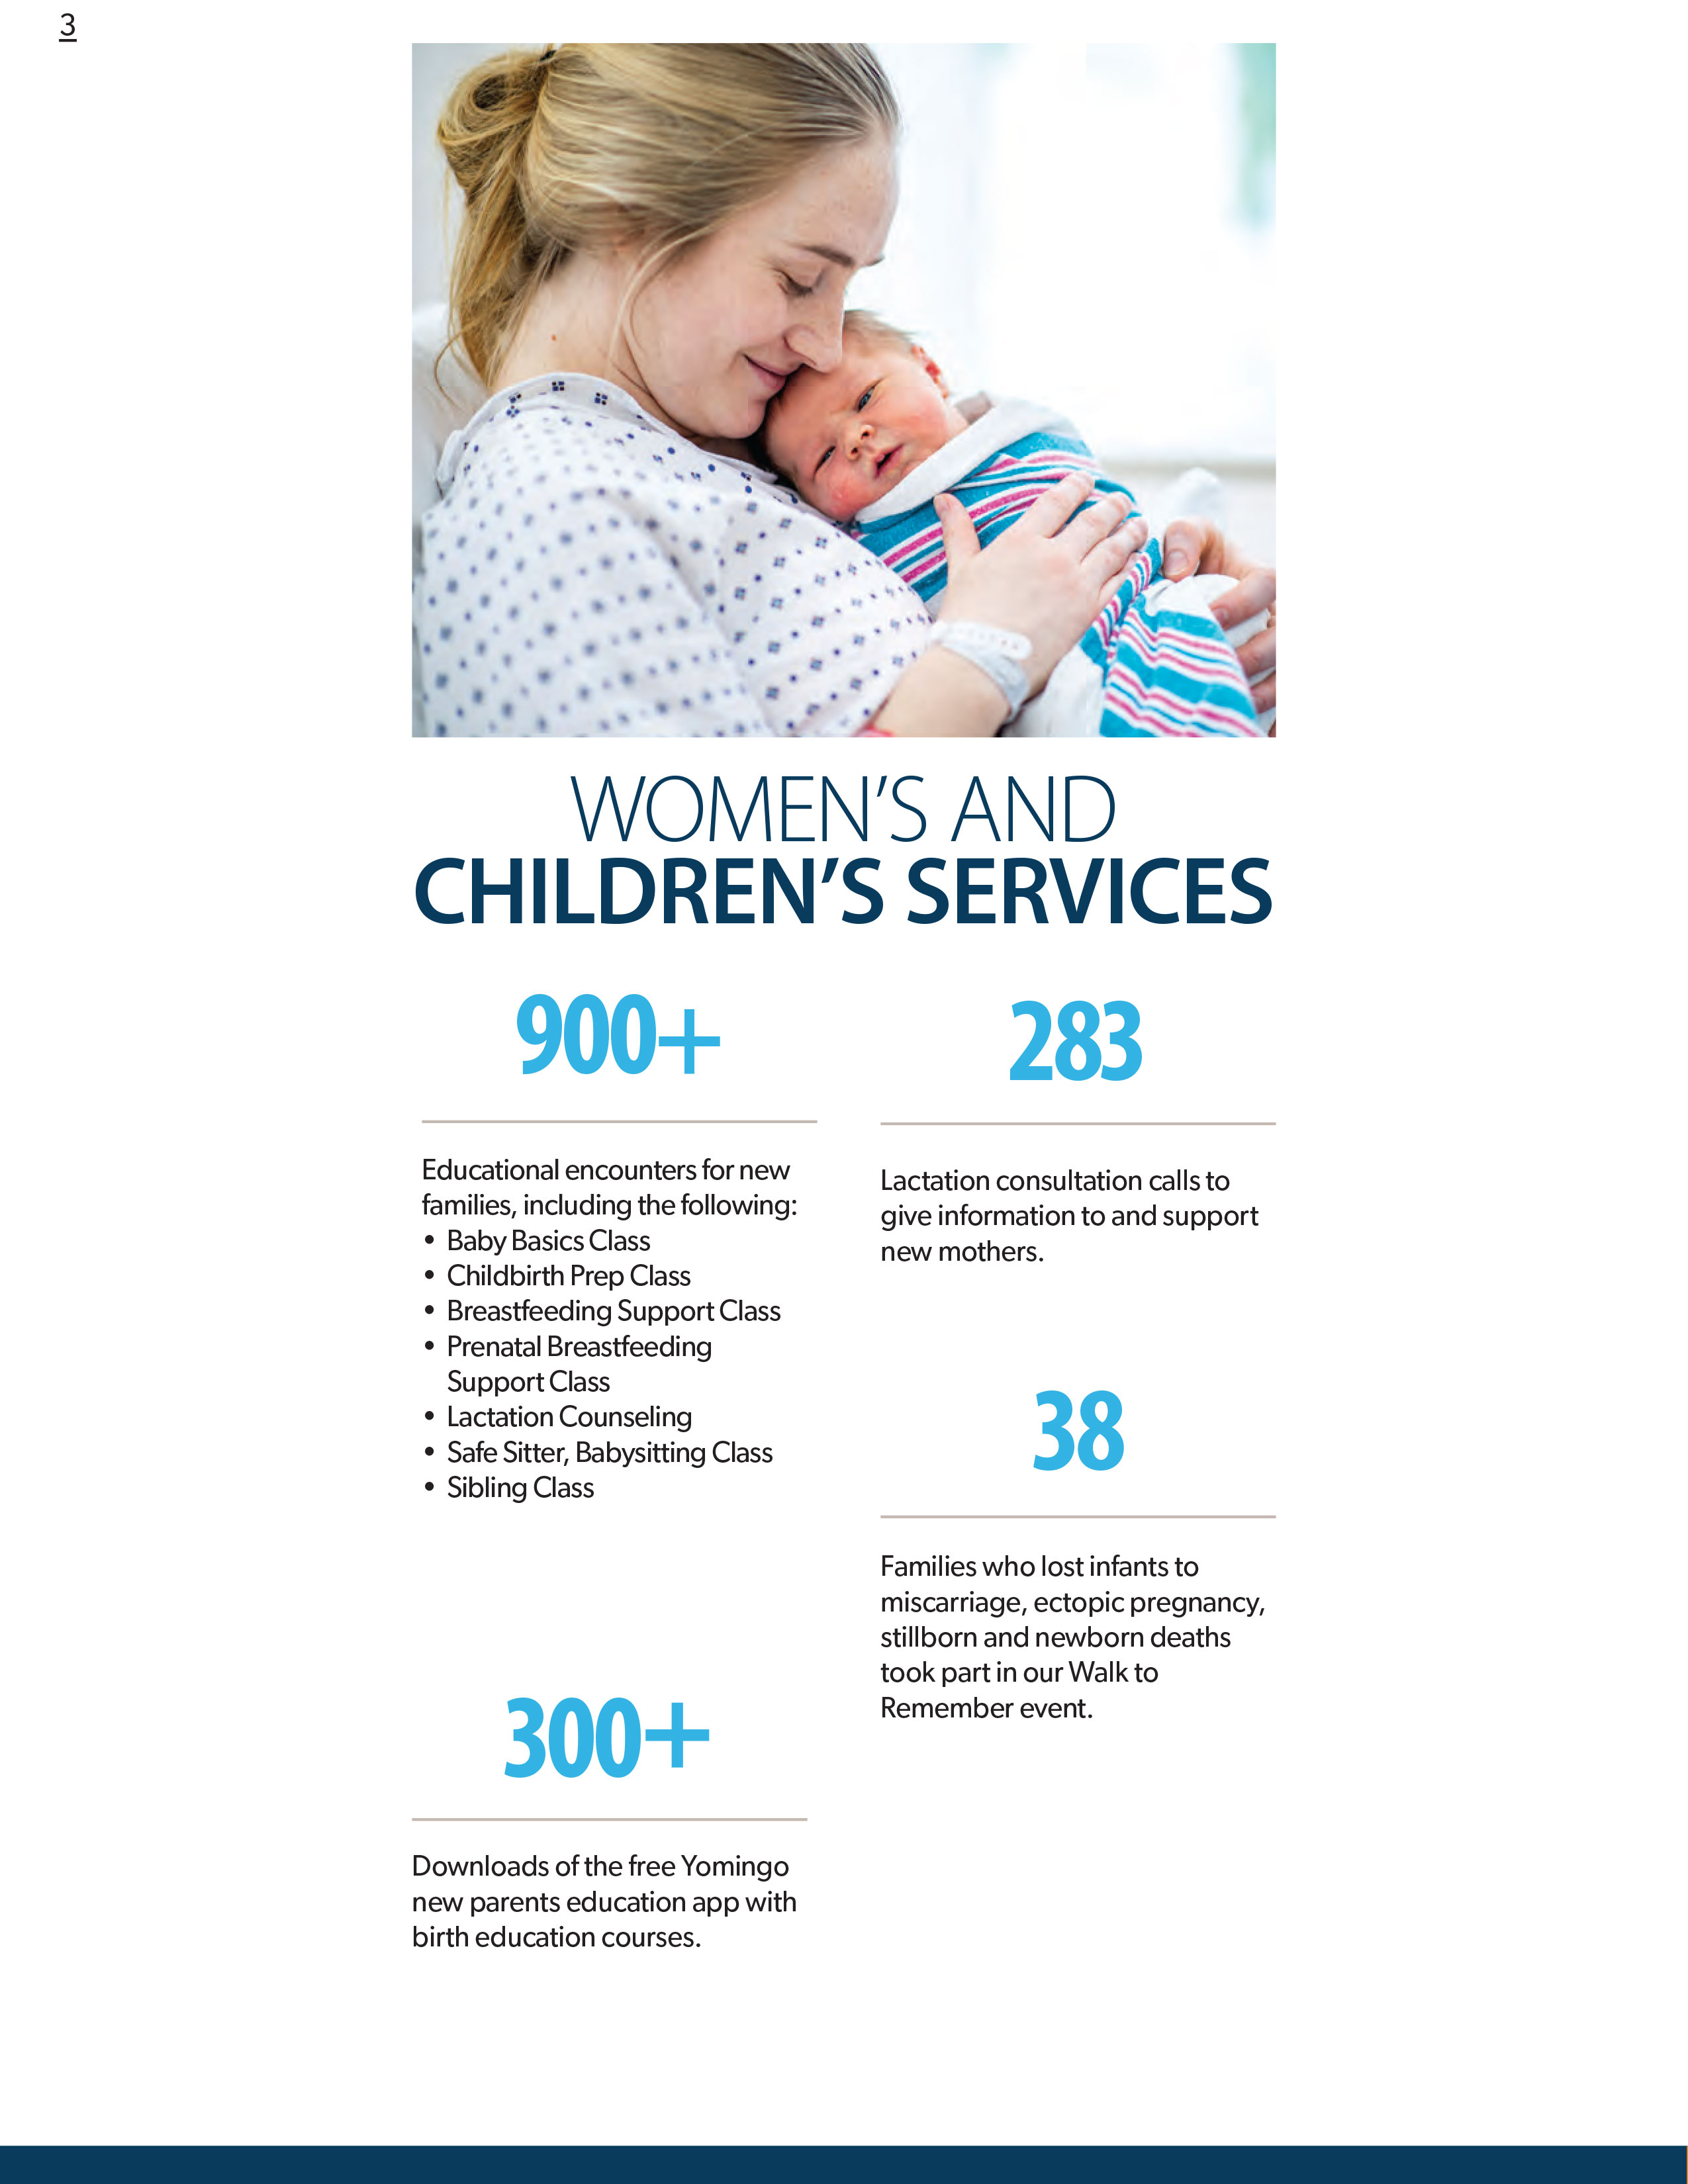 Women's and children's services